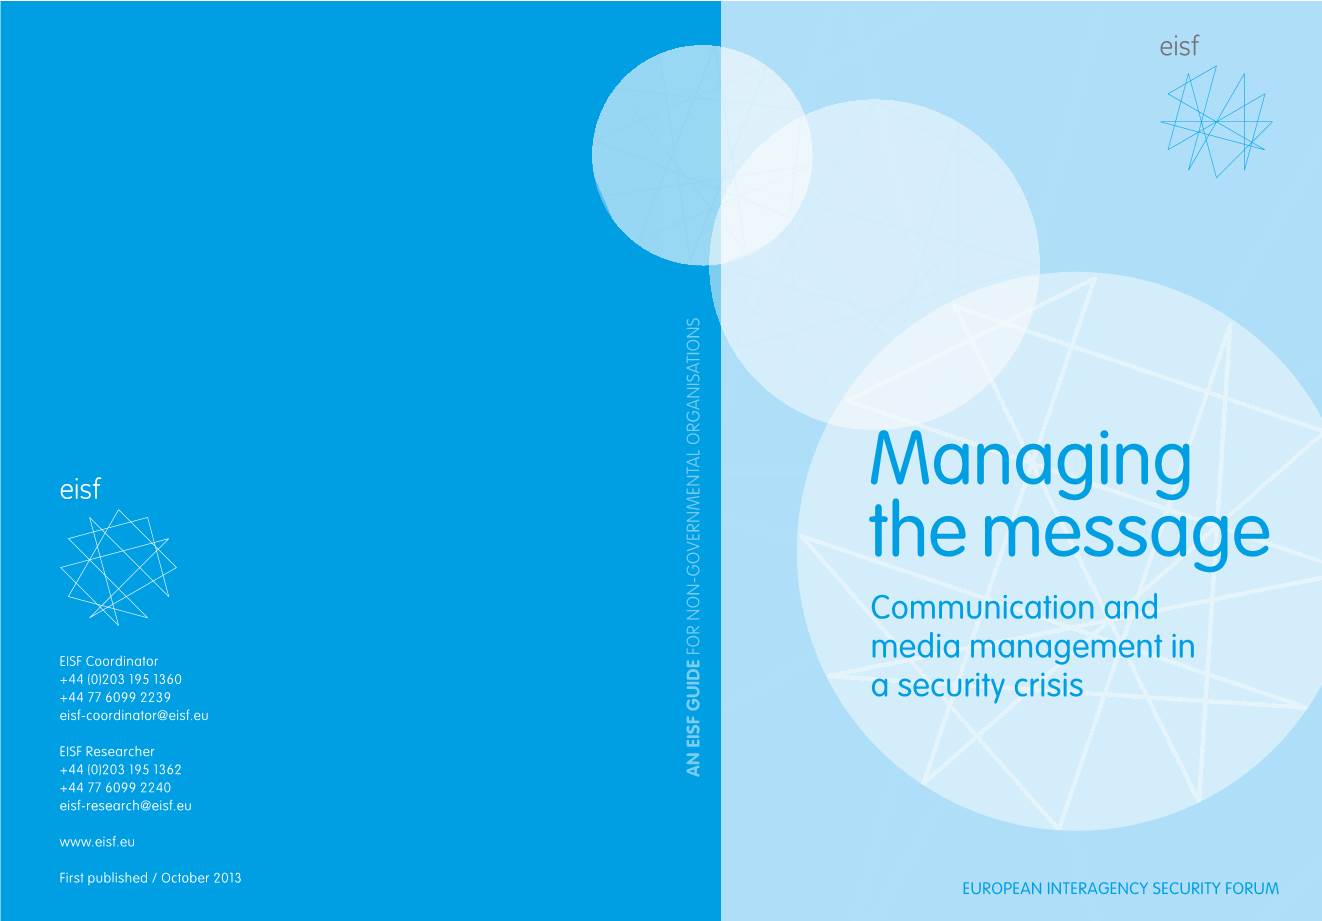 EISF Managing the Message Communication in a Security Crisis